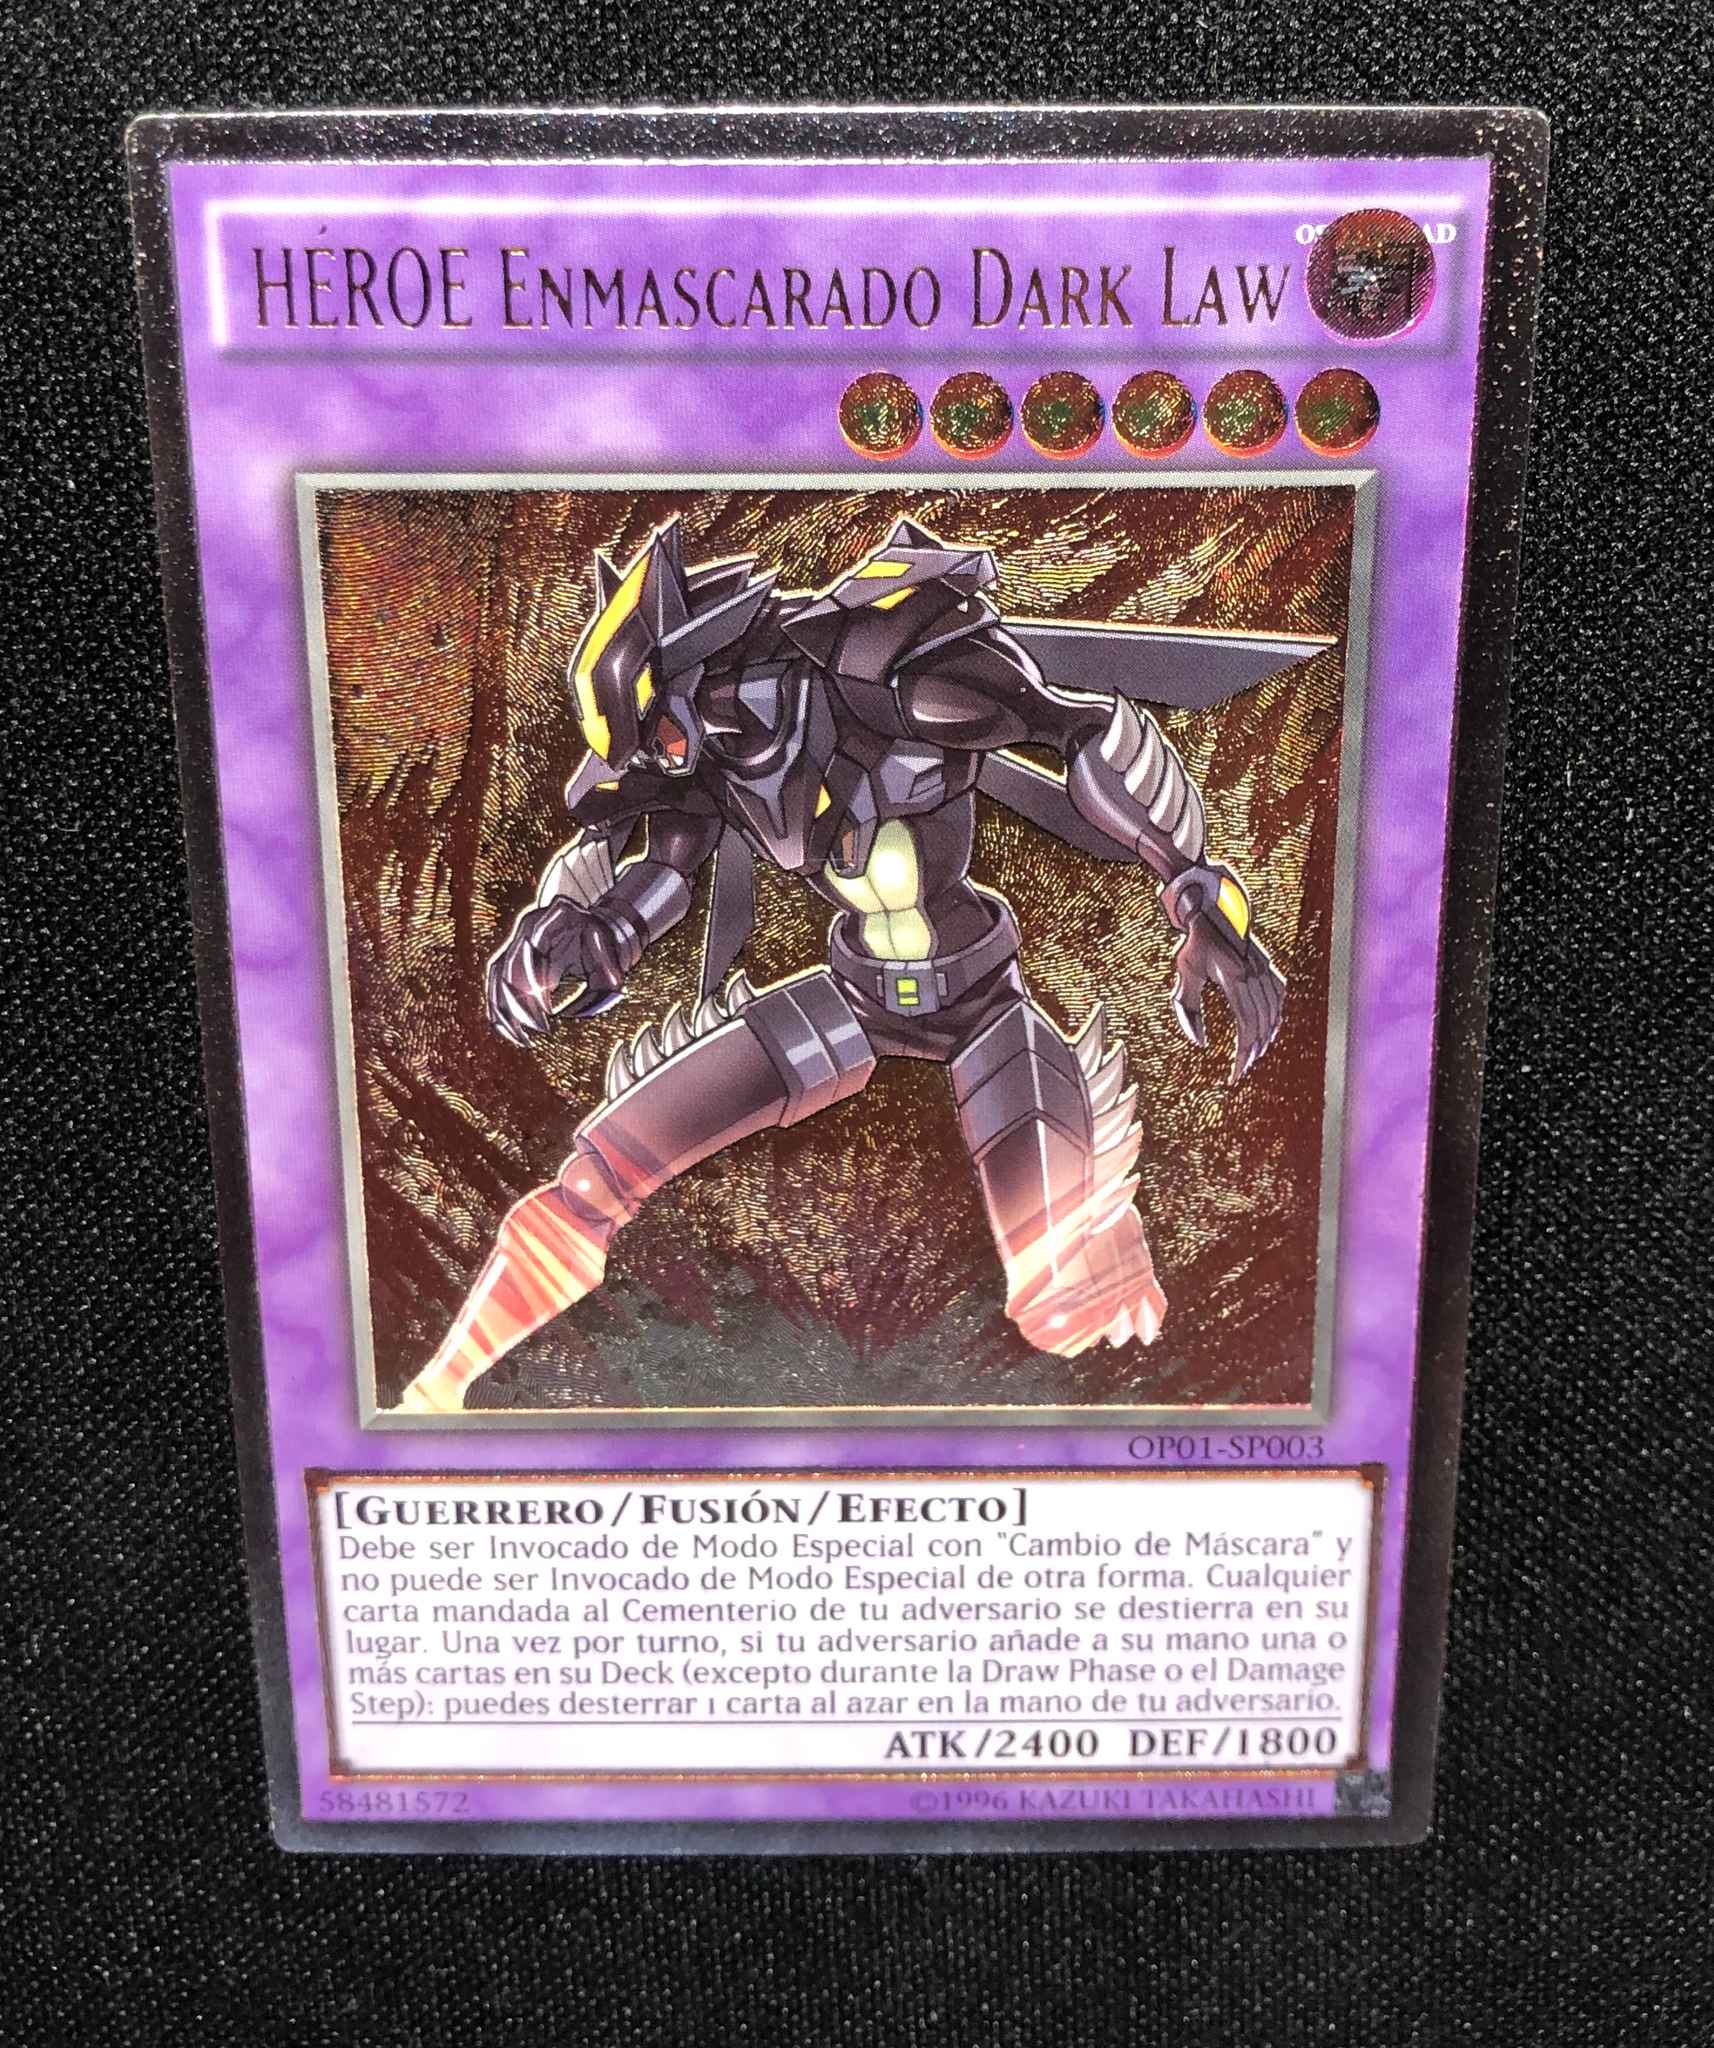 Spanish Masked Hero Dark Law Ultimate Rare Op01 Sp003 Masked Hero Dark Law Ots Tournament Pack 1 Yugioh Online Gaming Store For Cards Miniatures Singles Packs Booster Boxes